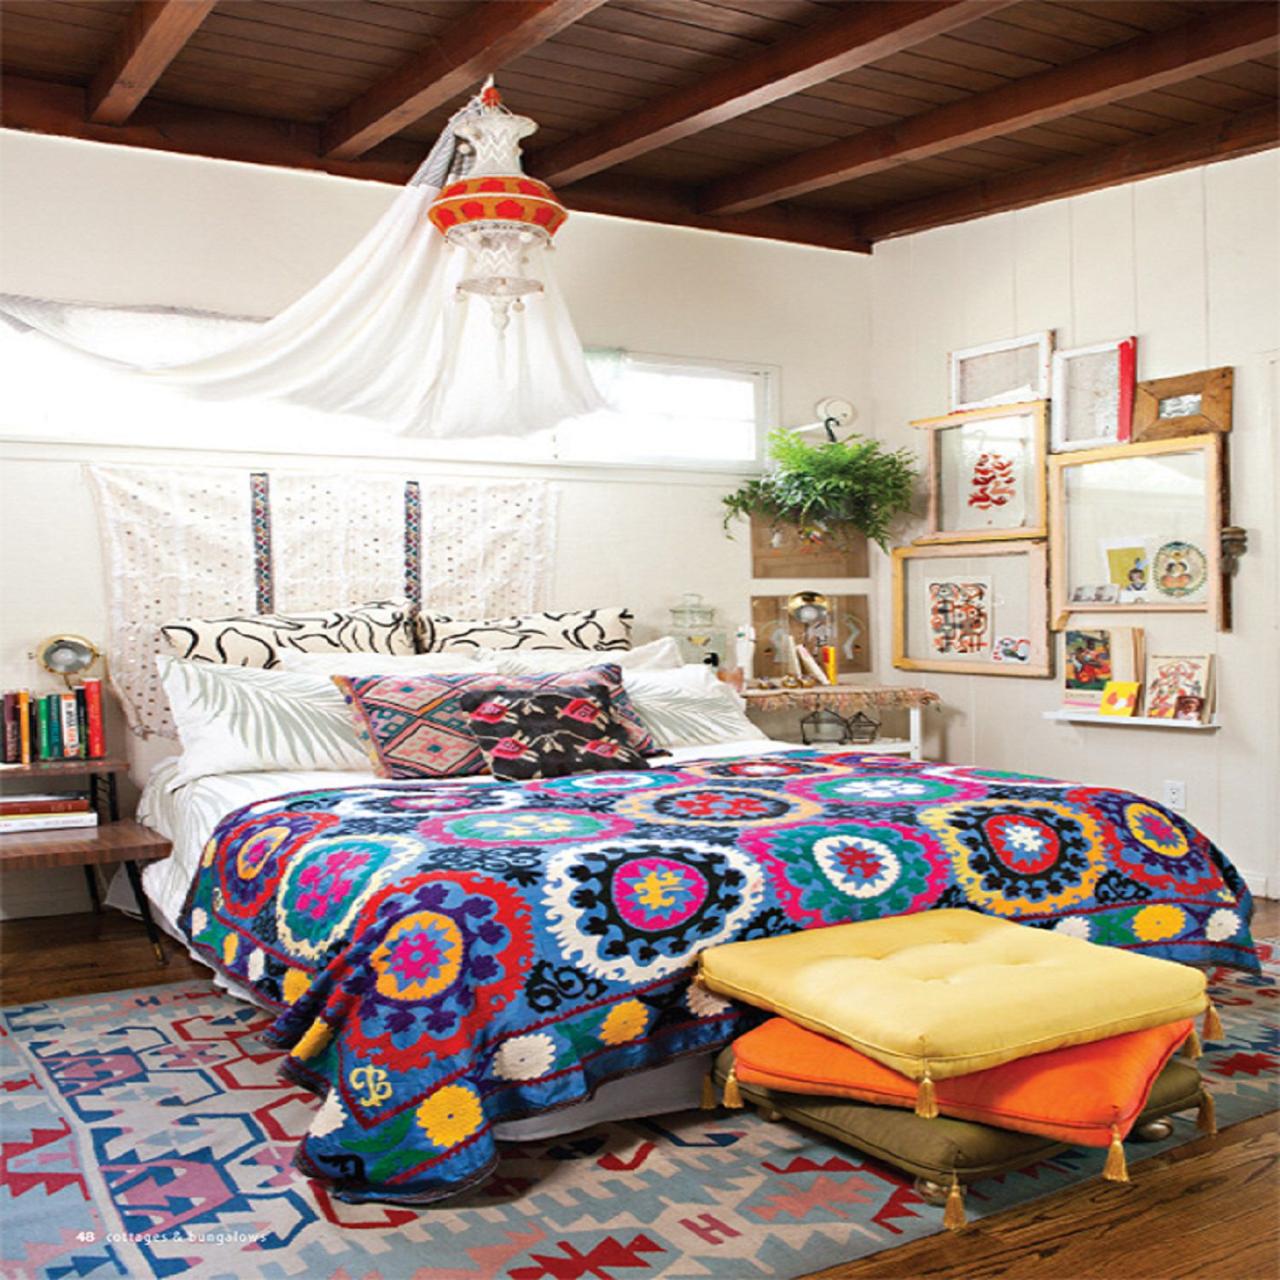 Boho Chic Retreat: Relaxed and Inviting Bedroom Decor